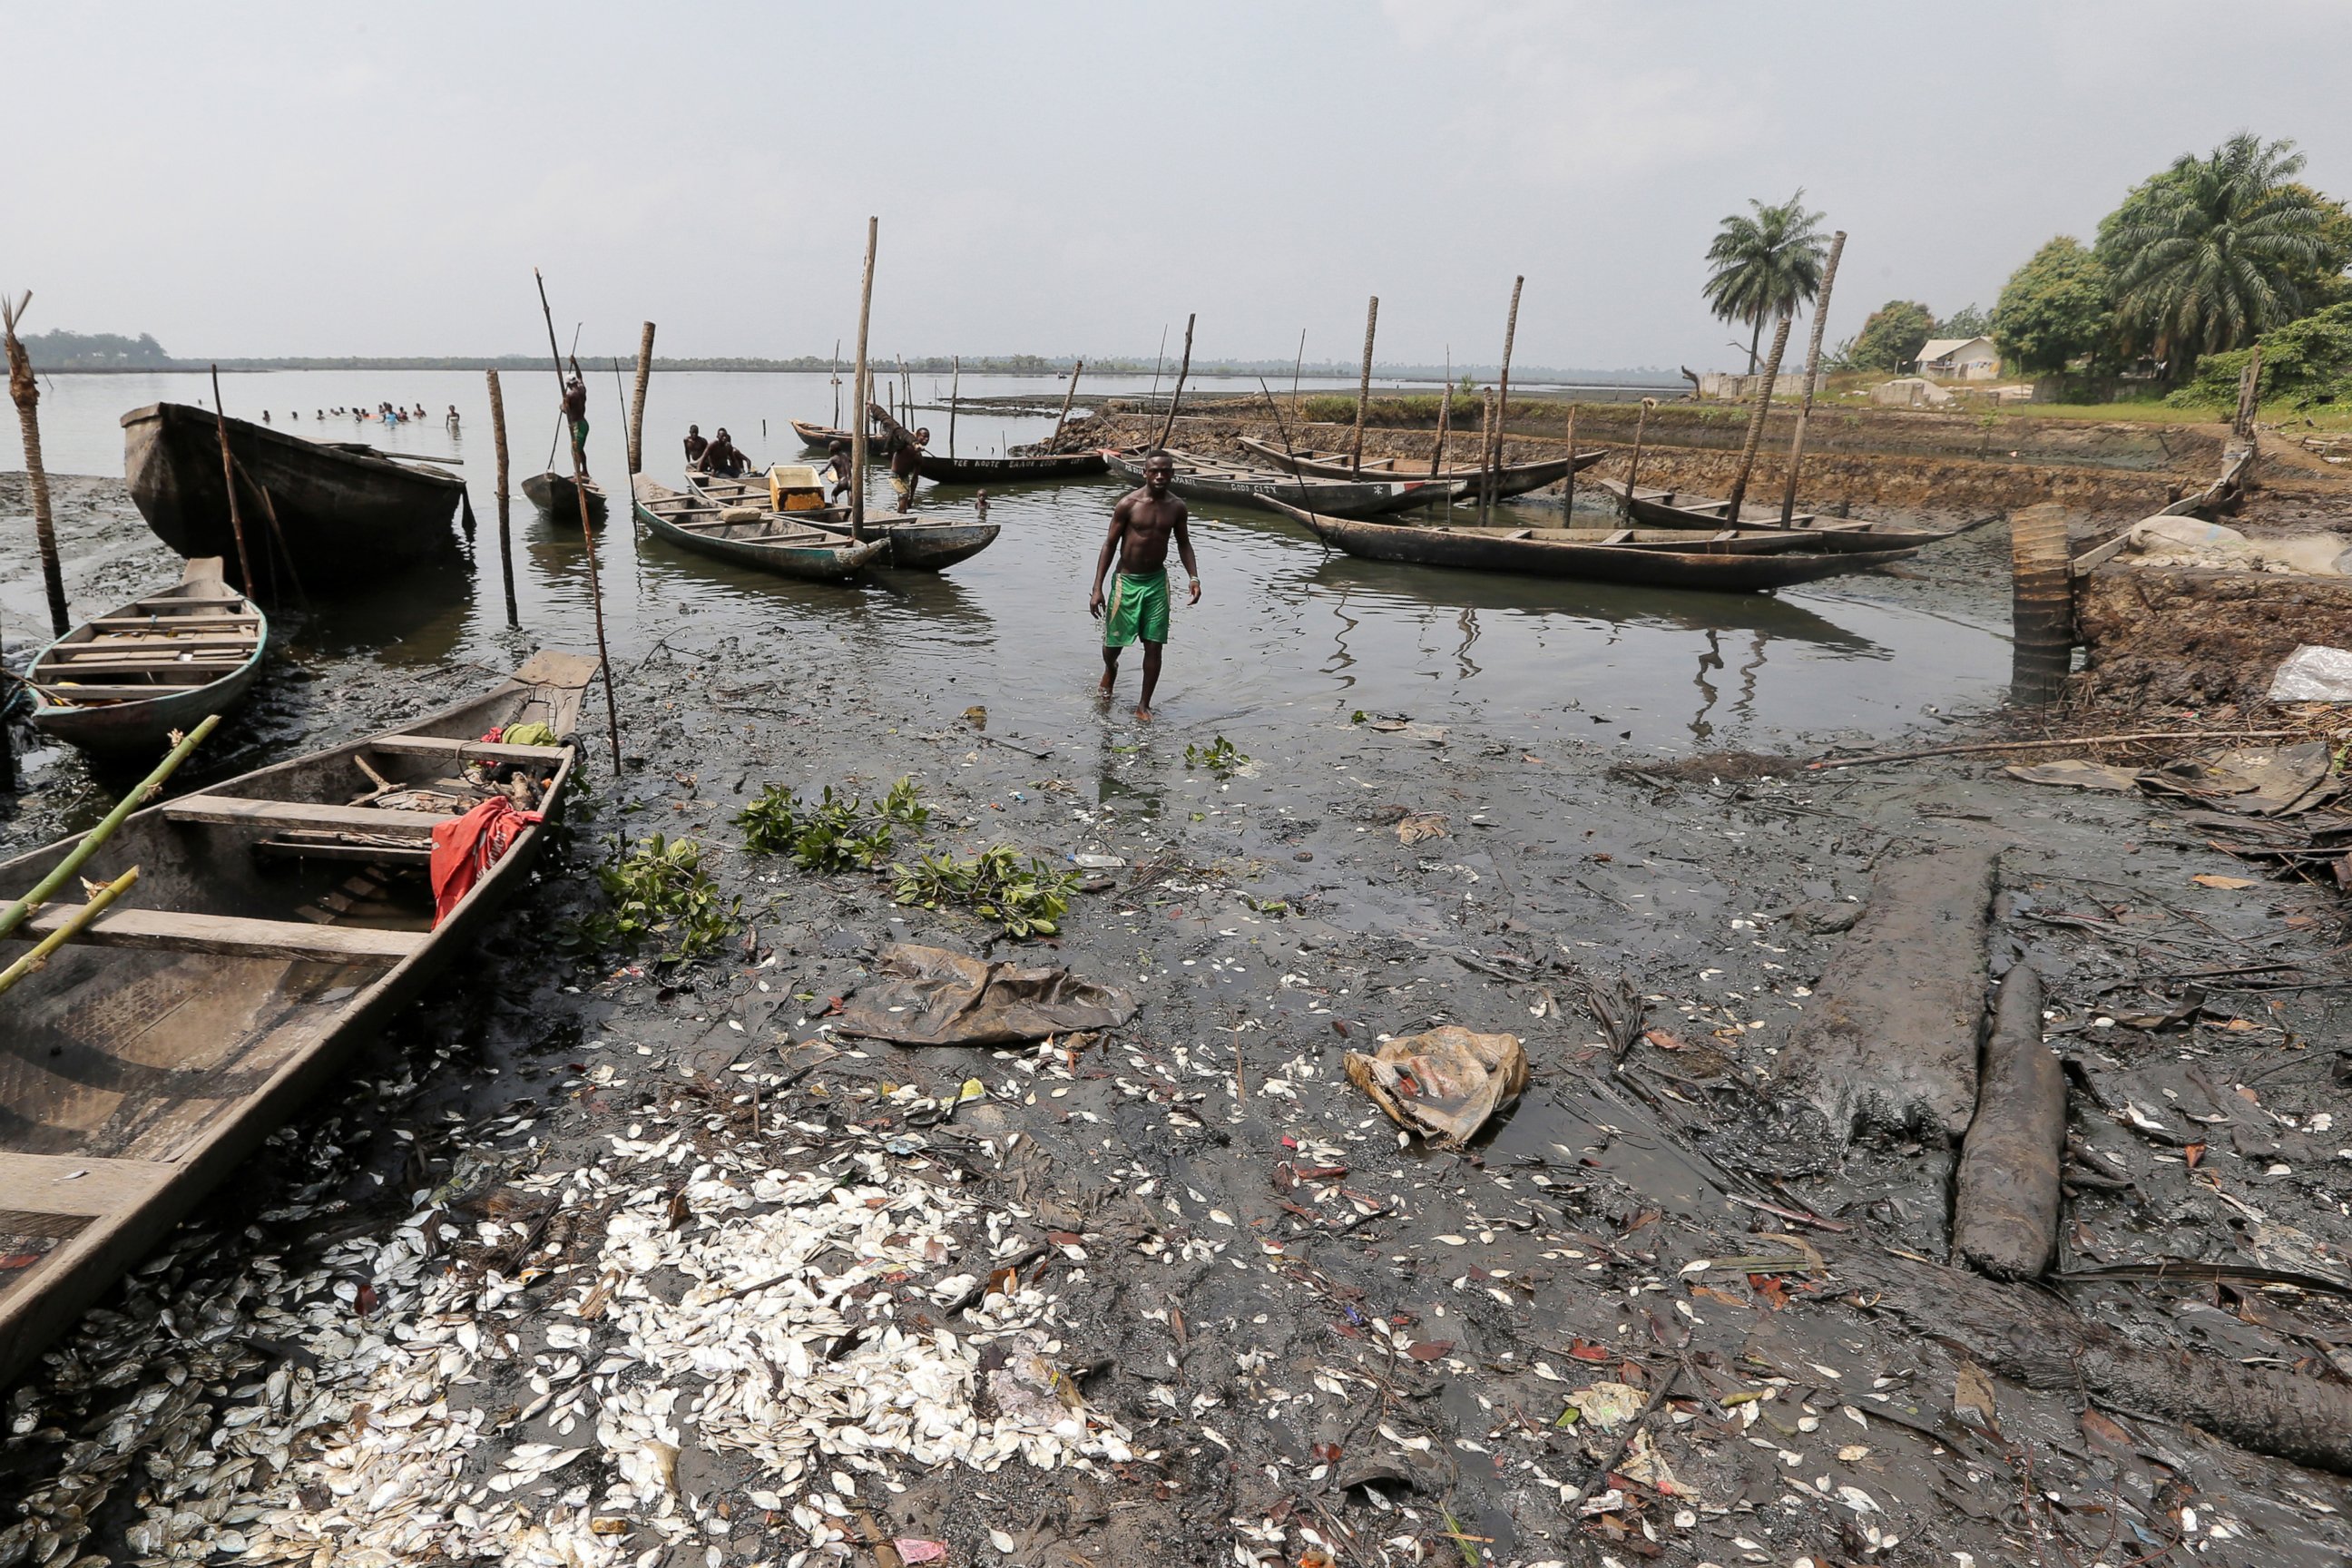 PHOTO: Dead fish lie on the polluted shoreline near a house under construction in Bodo, Nigeria, Jan. 13, 2016.